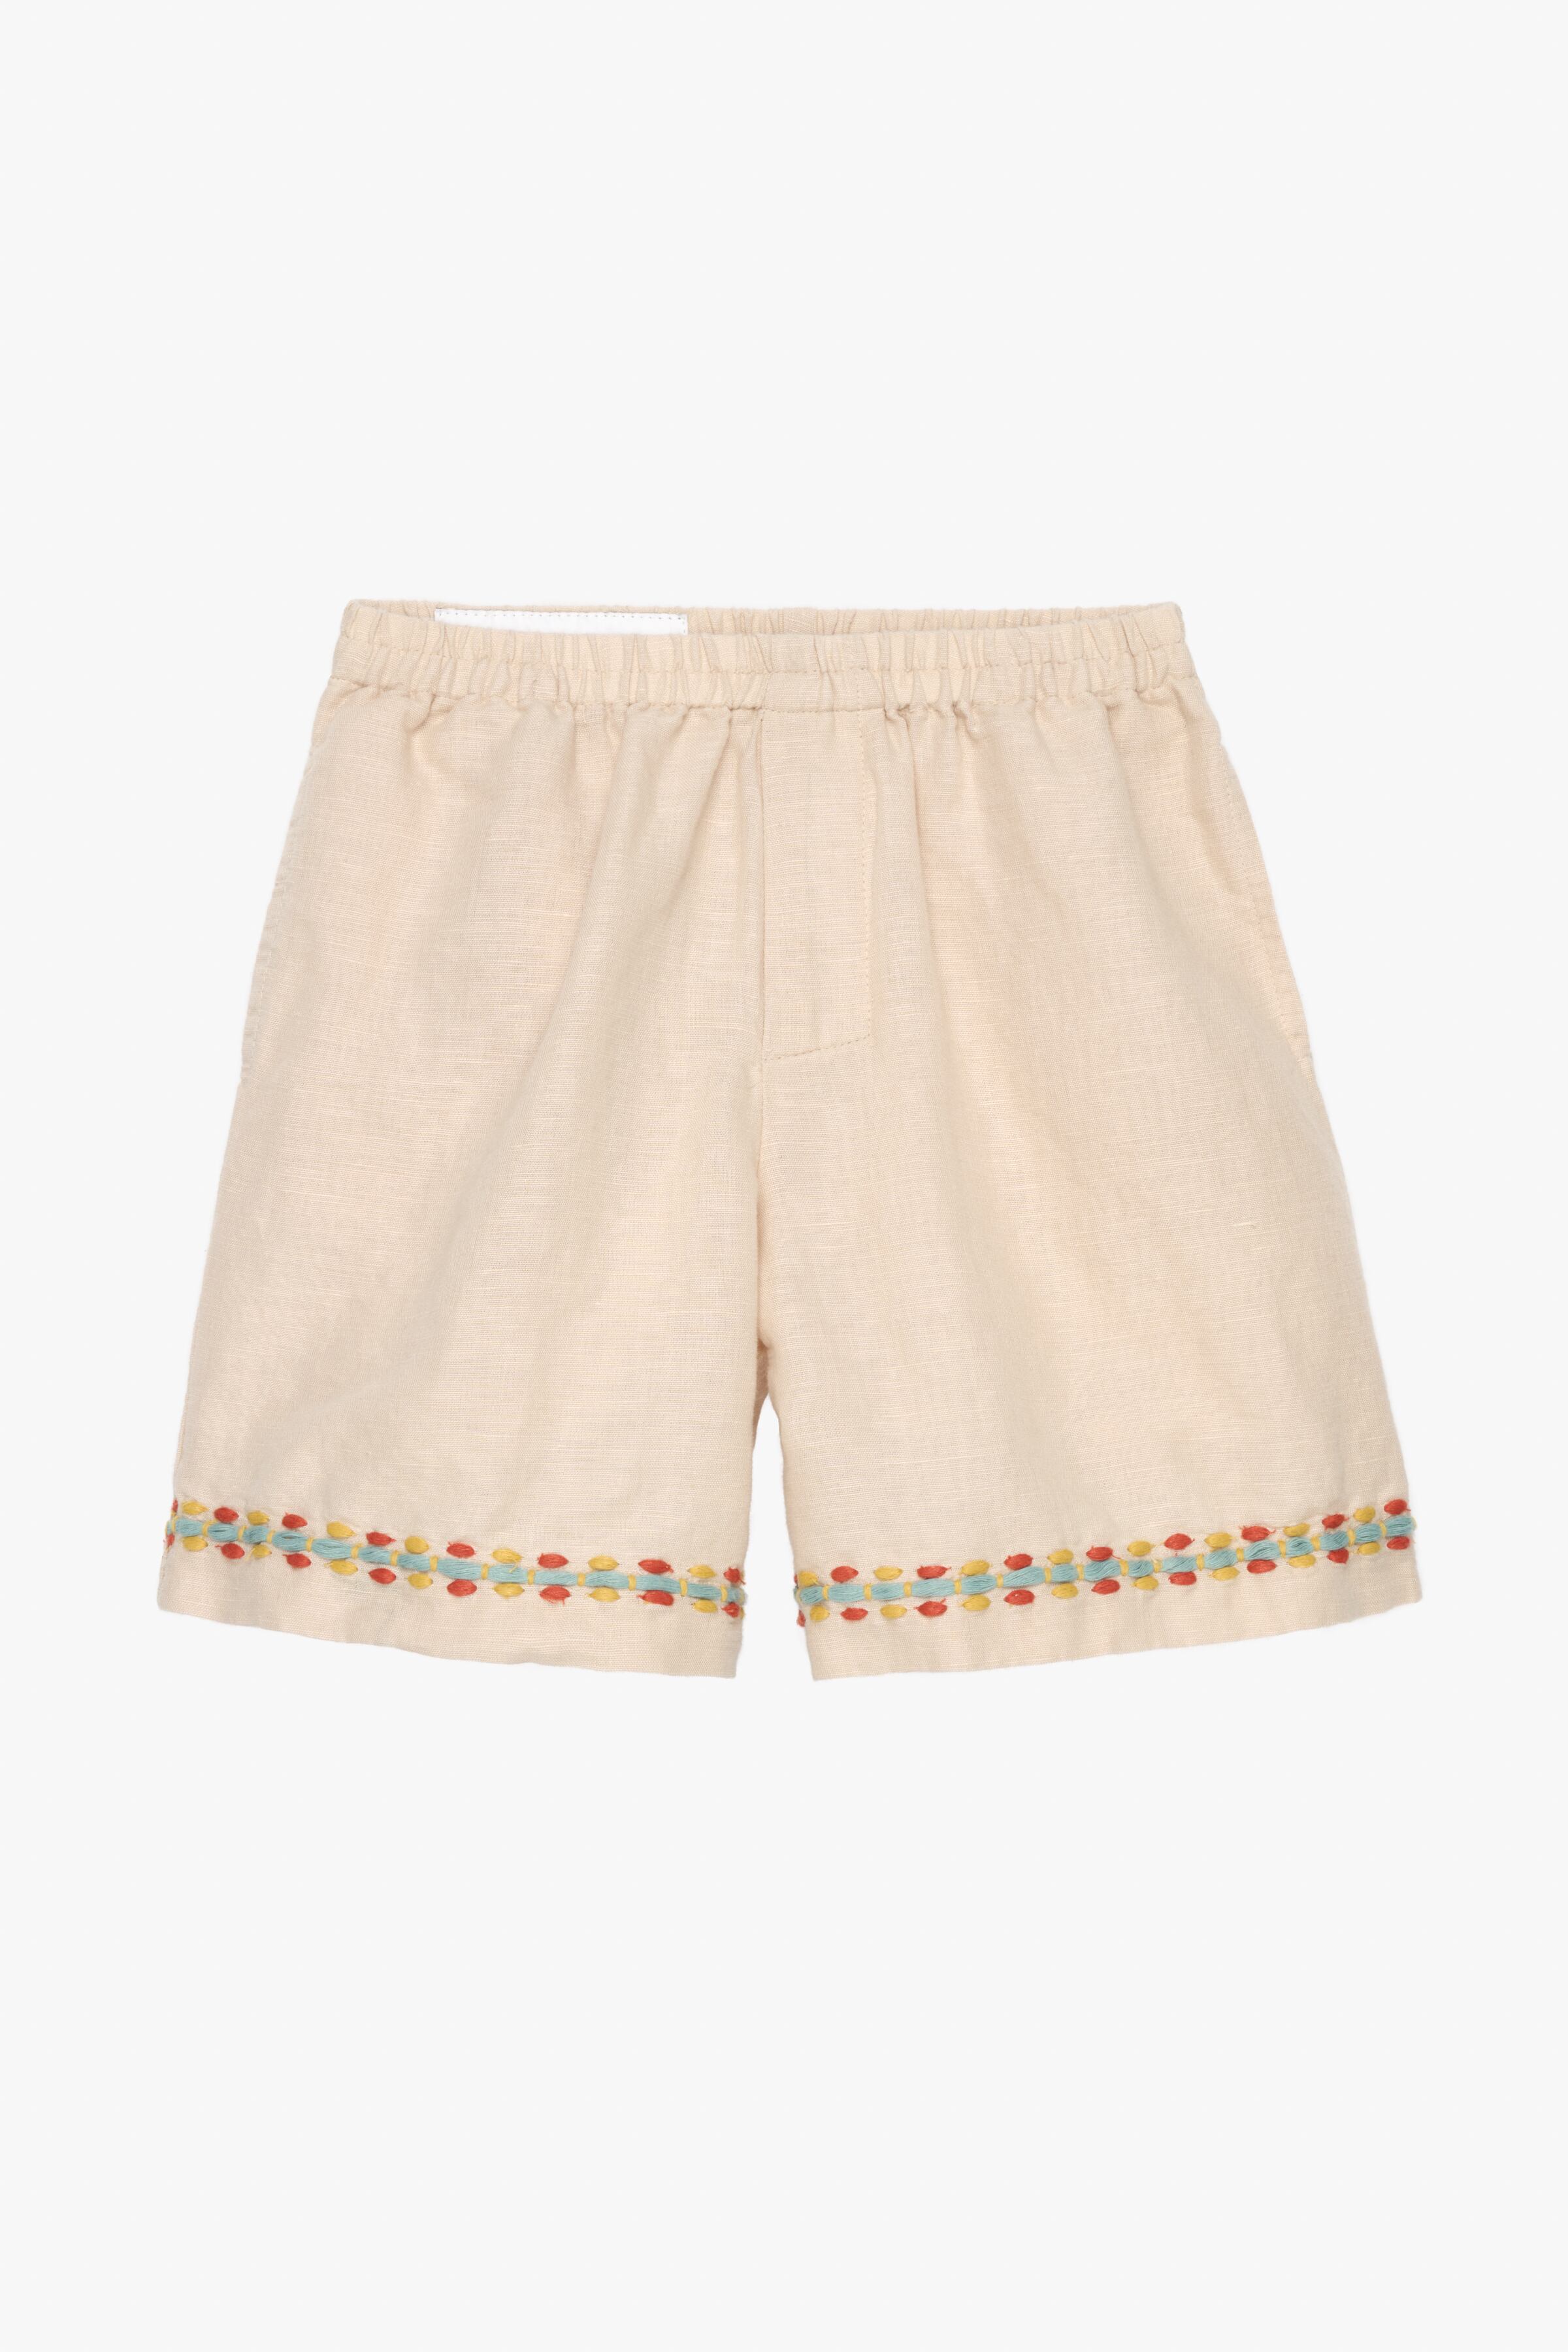 EMBROIDERED LINEN BLEND SHORTS LIMITED EDITION